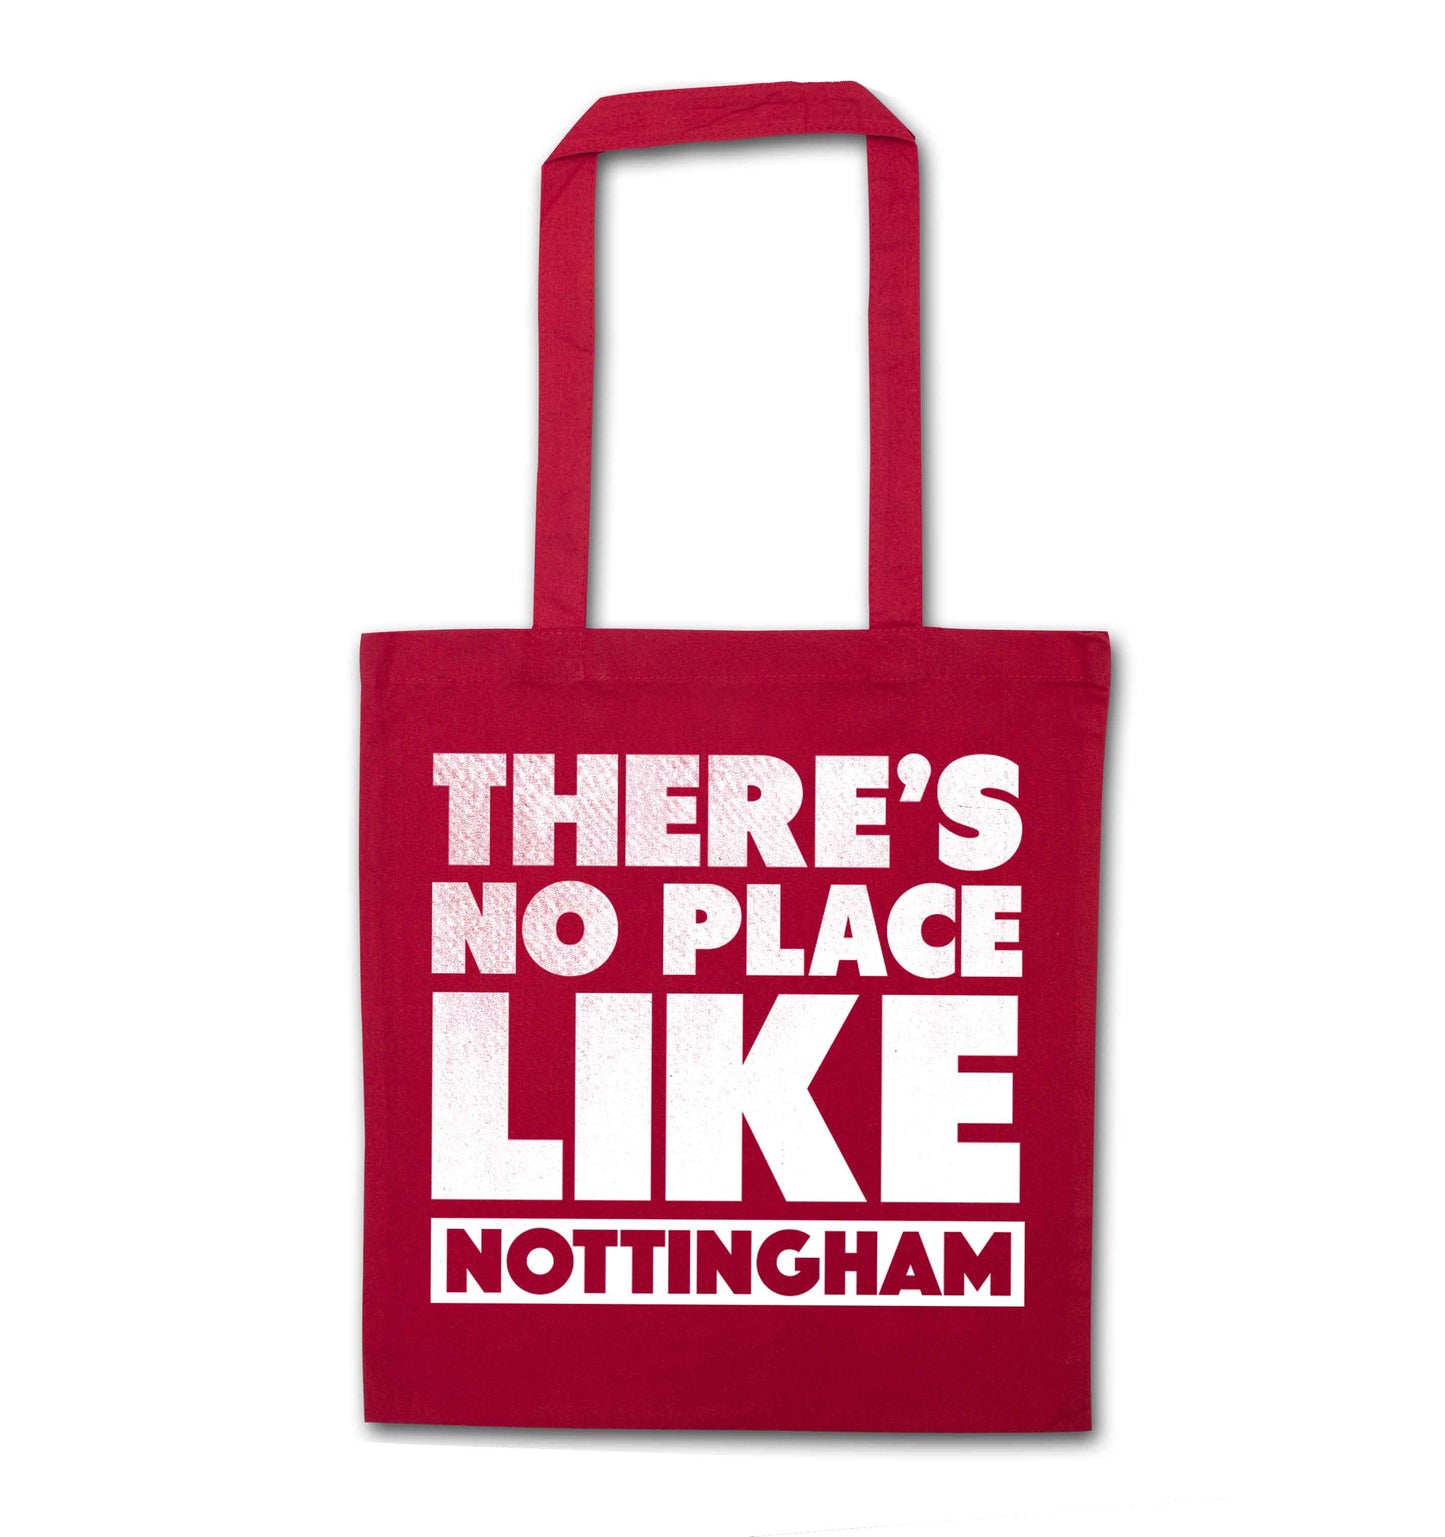 There's no place like Nottingham red tote bag